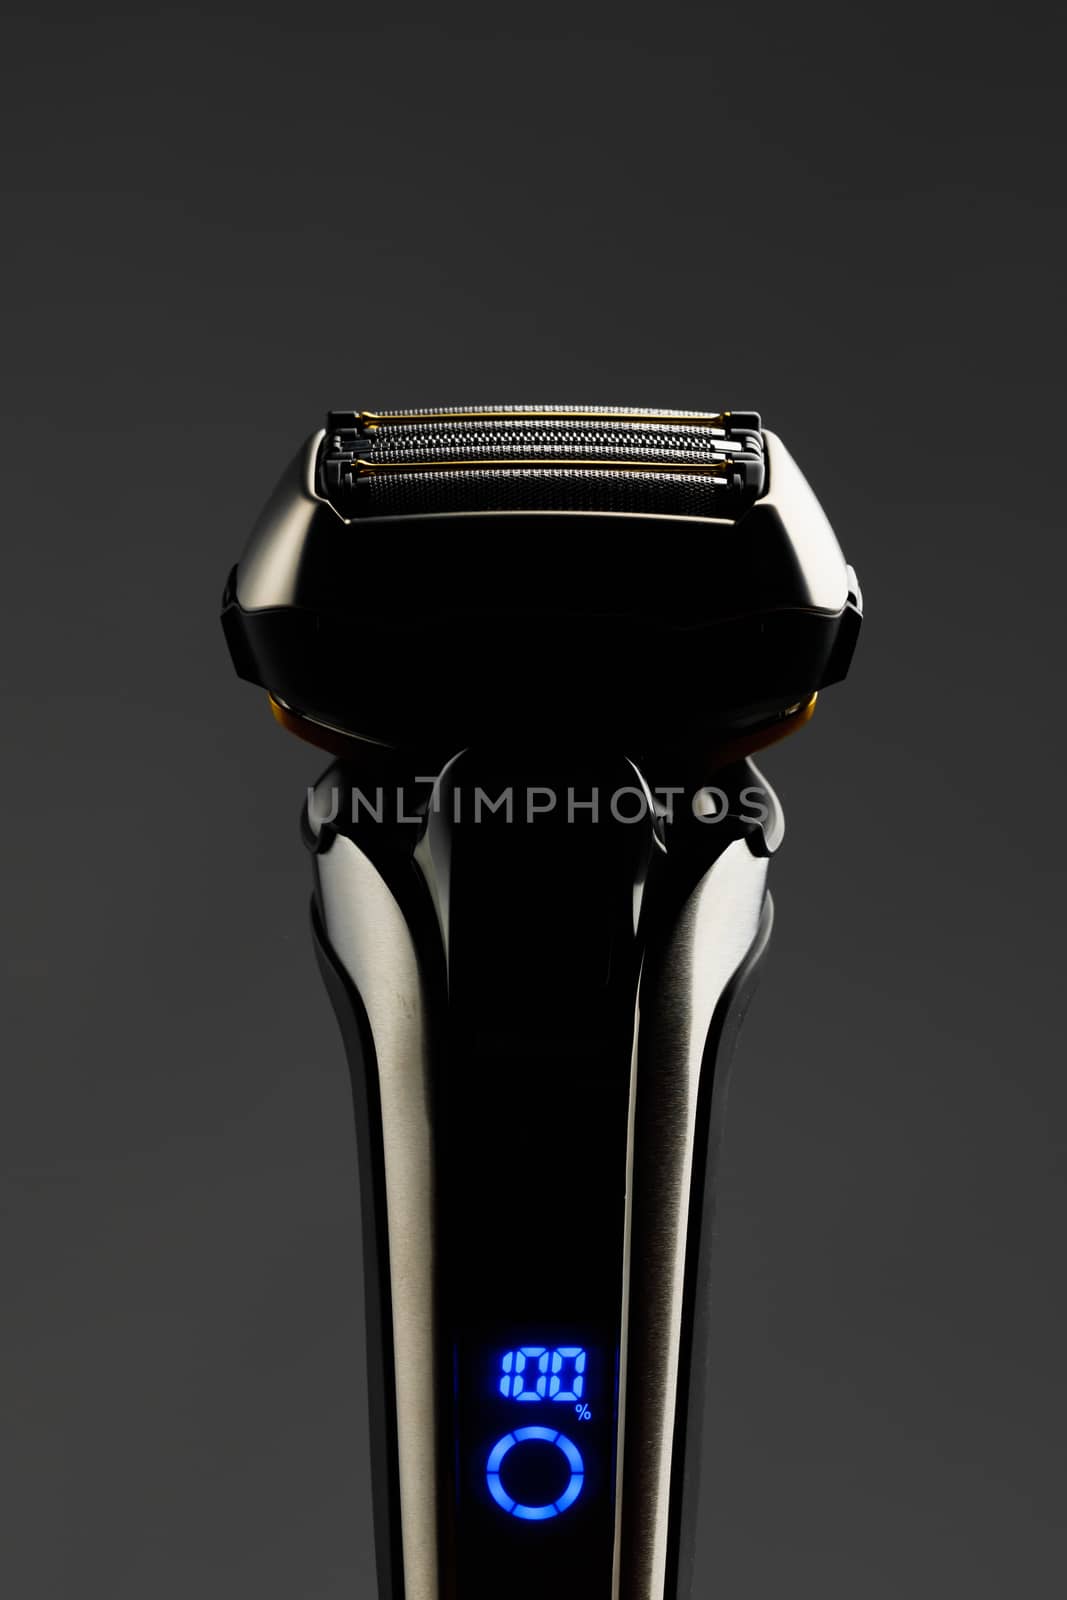 electric razor foil shaver mesh and blades, close-up view, gray background